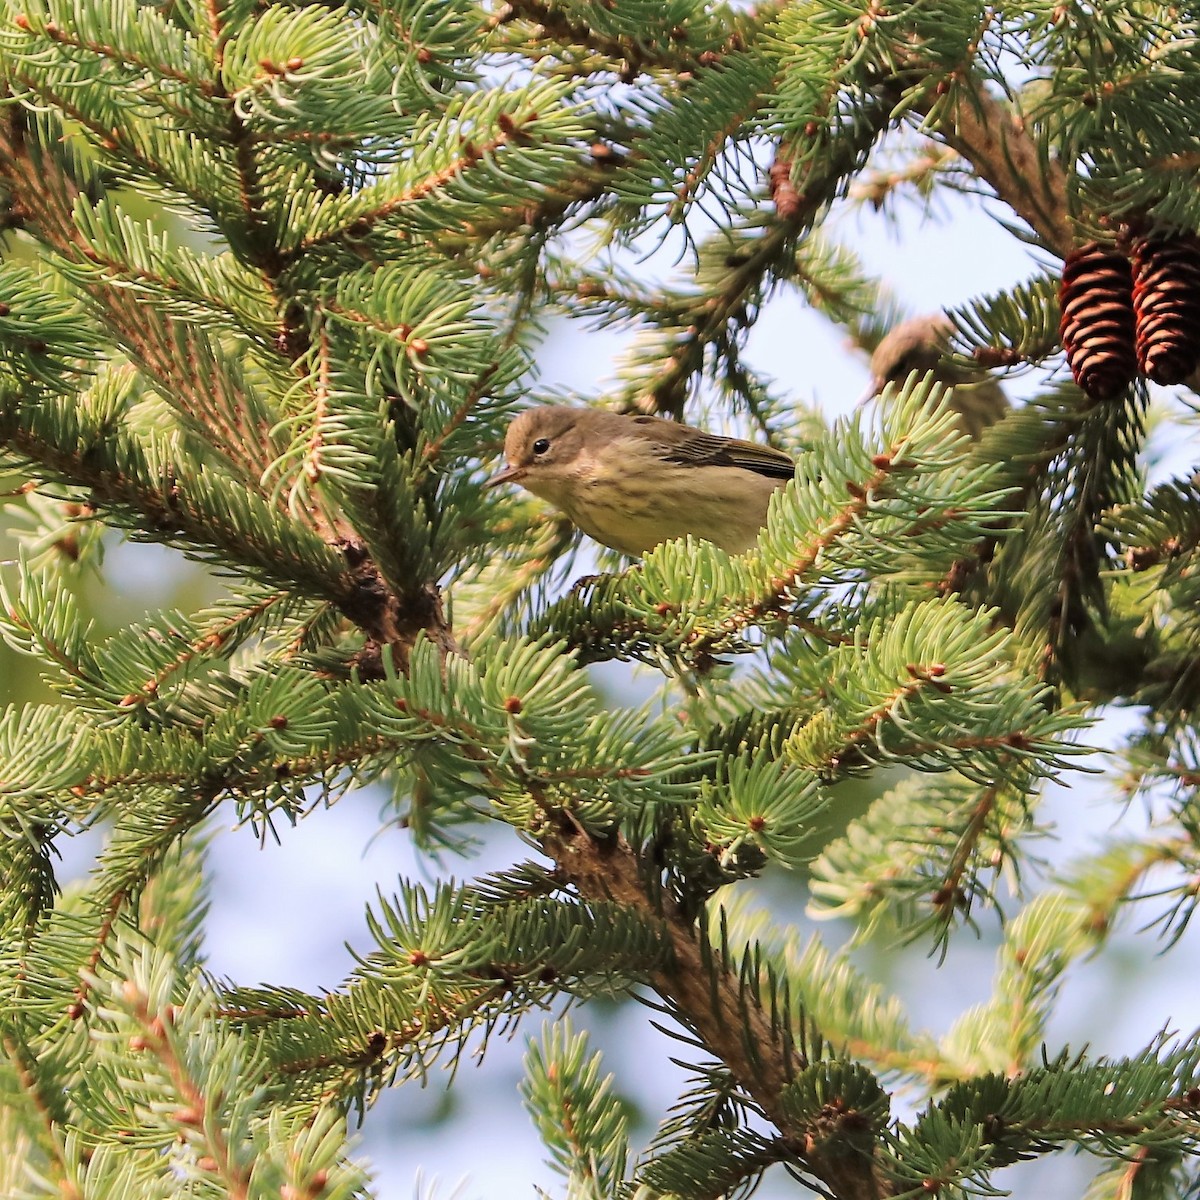 Cape May Warbler - Team Sidhu-White